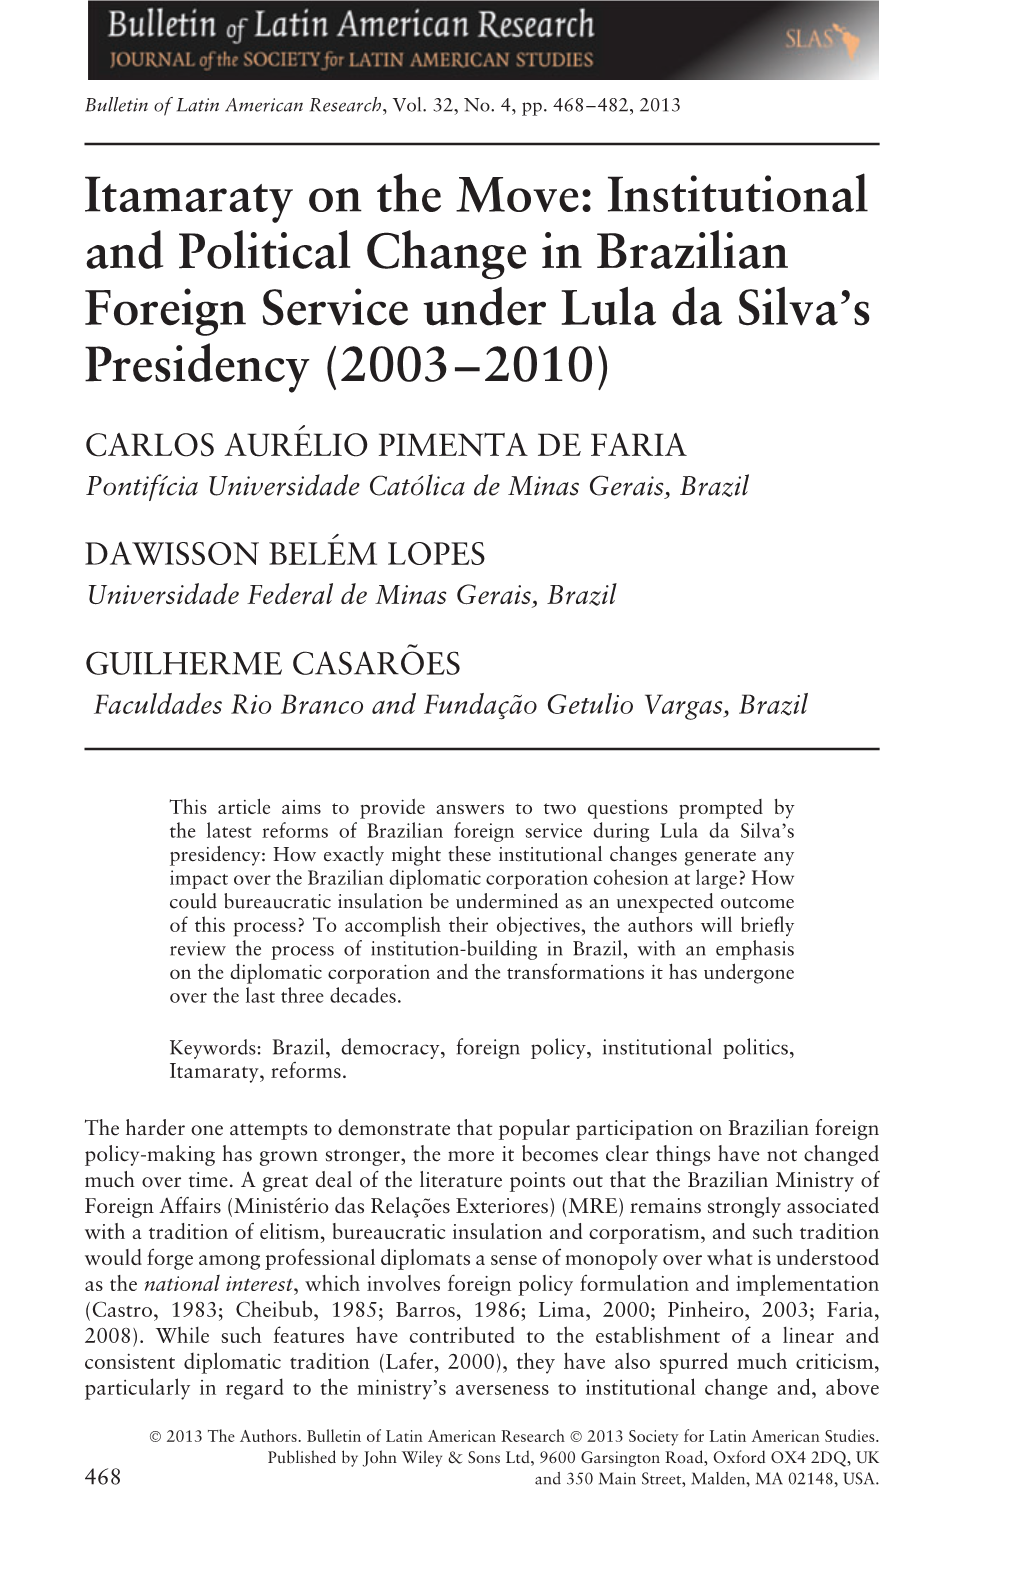 Itamaraty on the Move: Institutional and Political Change in Brazilian Foreign Service Under Lula Da Silva’S Presidency (2003–2010)